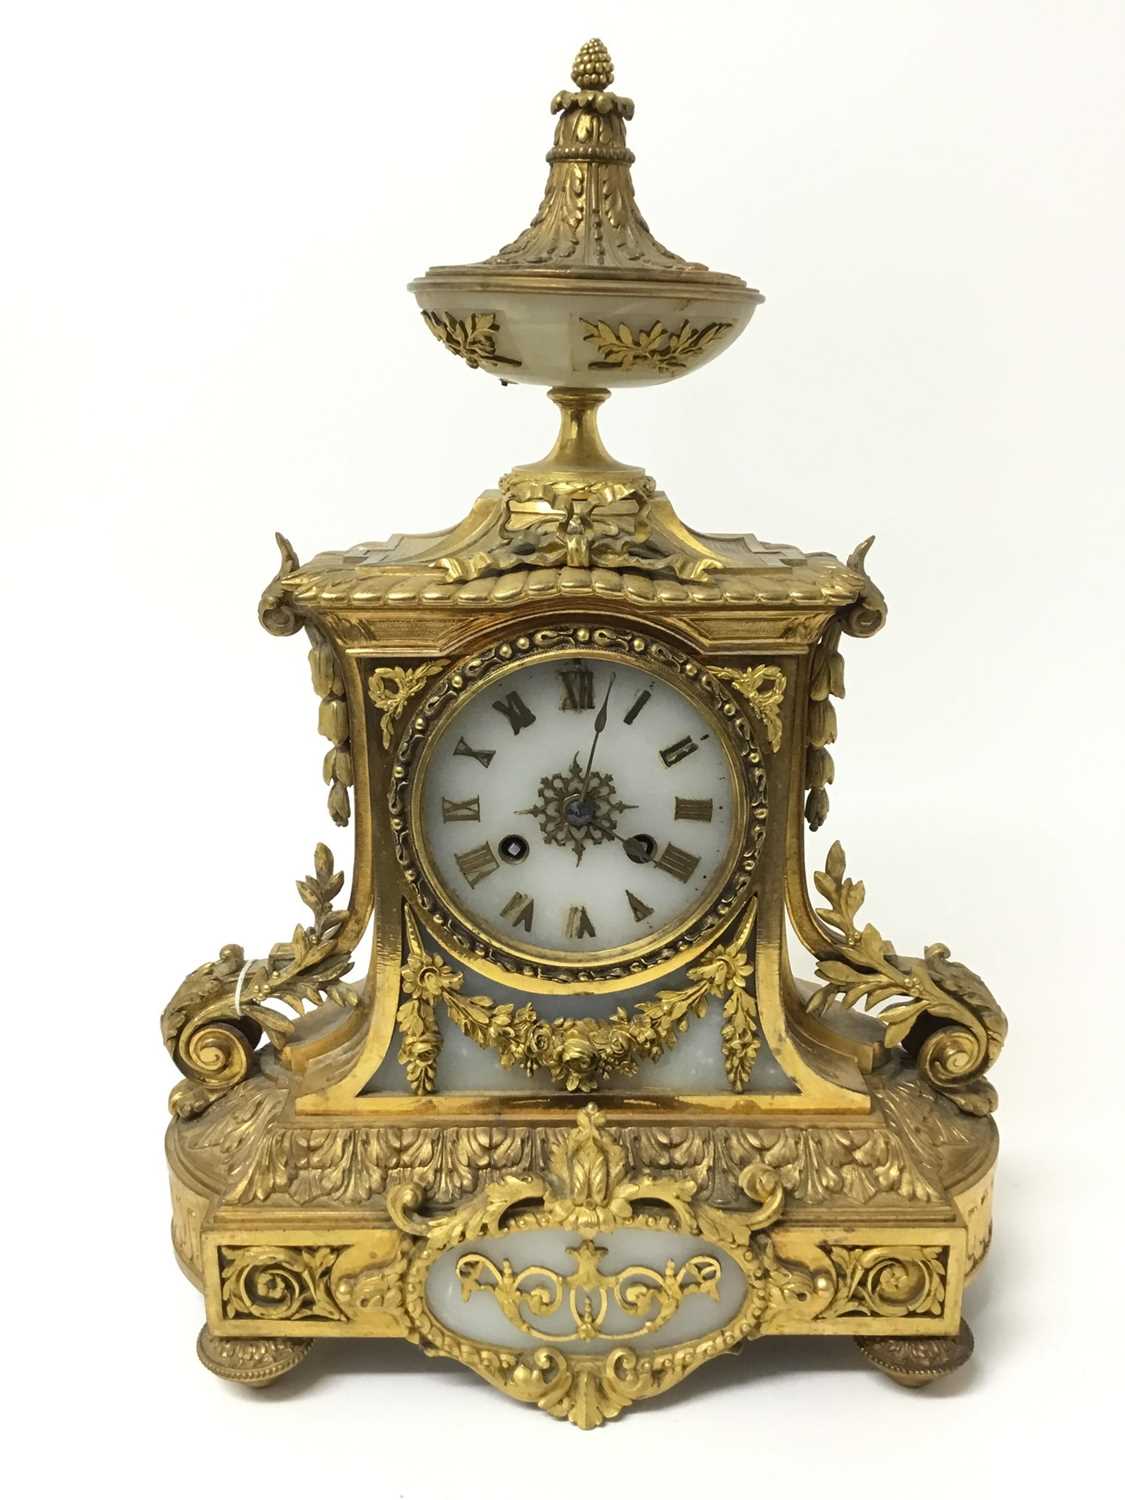 Good quality 19th century French Ormolu and White alabaster mantel clock